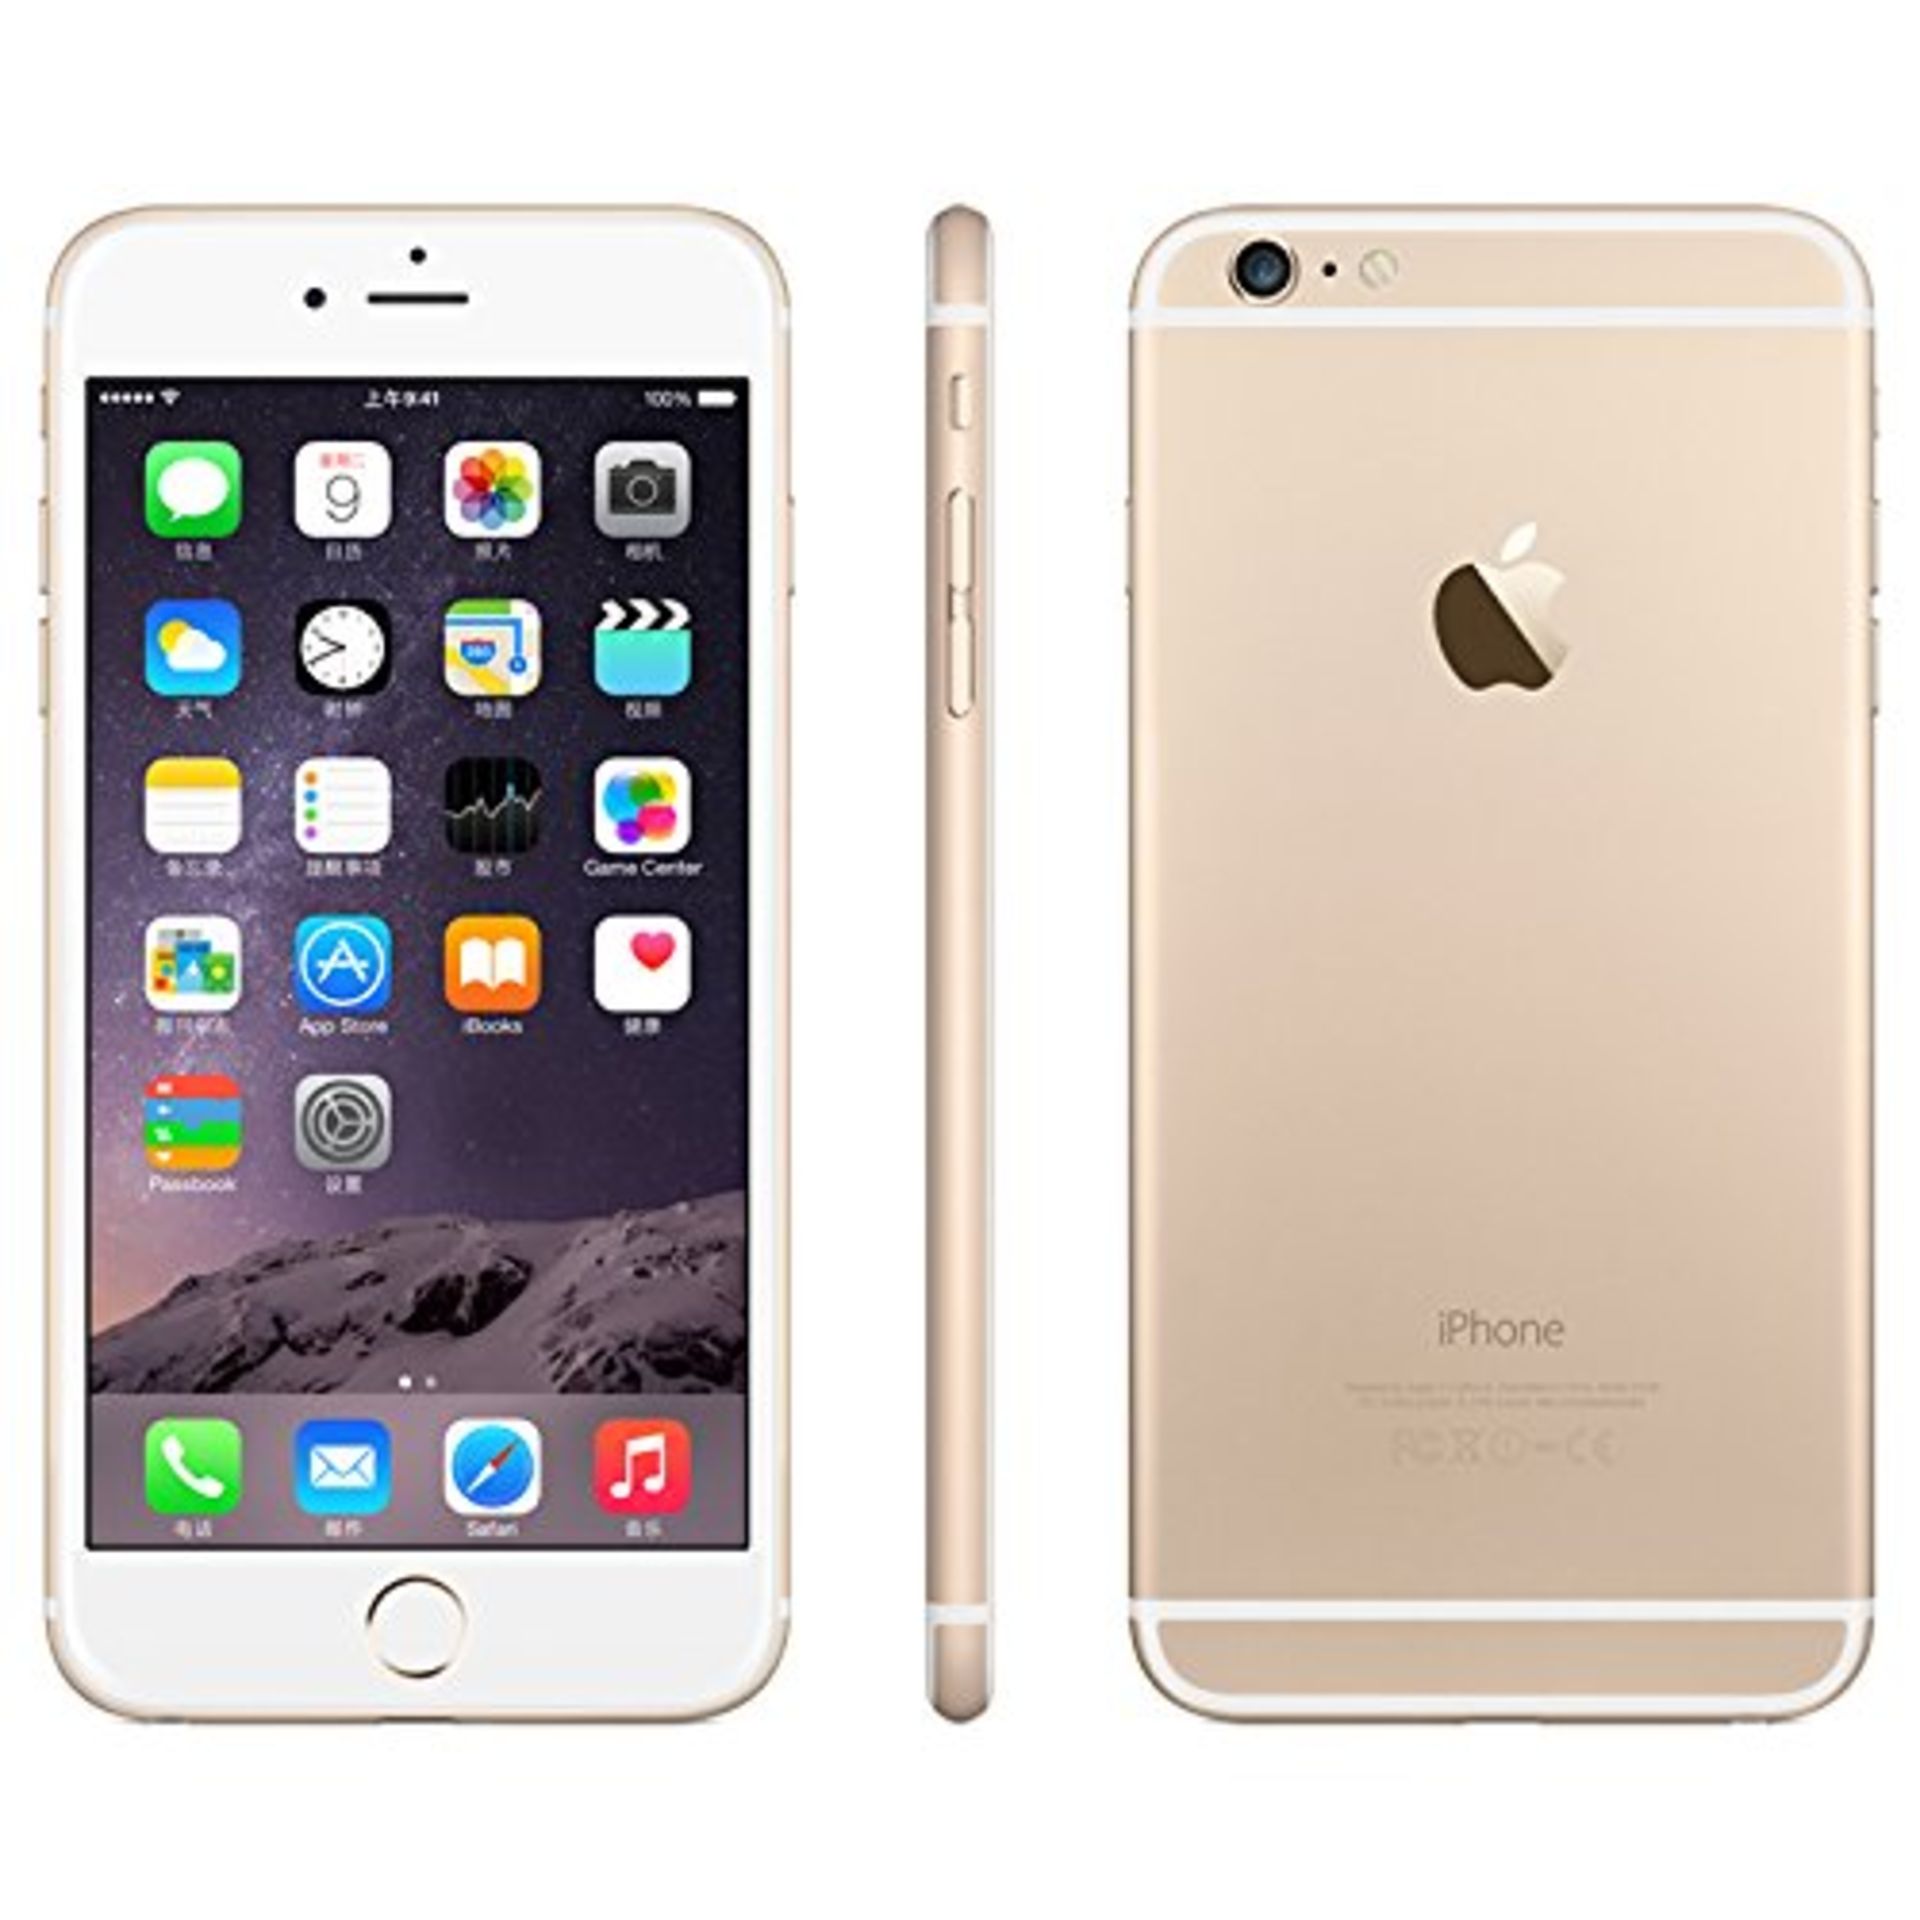 No VAT Grade A Apple iphone 6 plus 128GB Colours May Vary Touch ID Item available approx 15 working